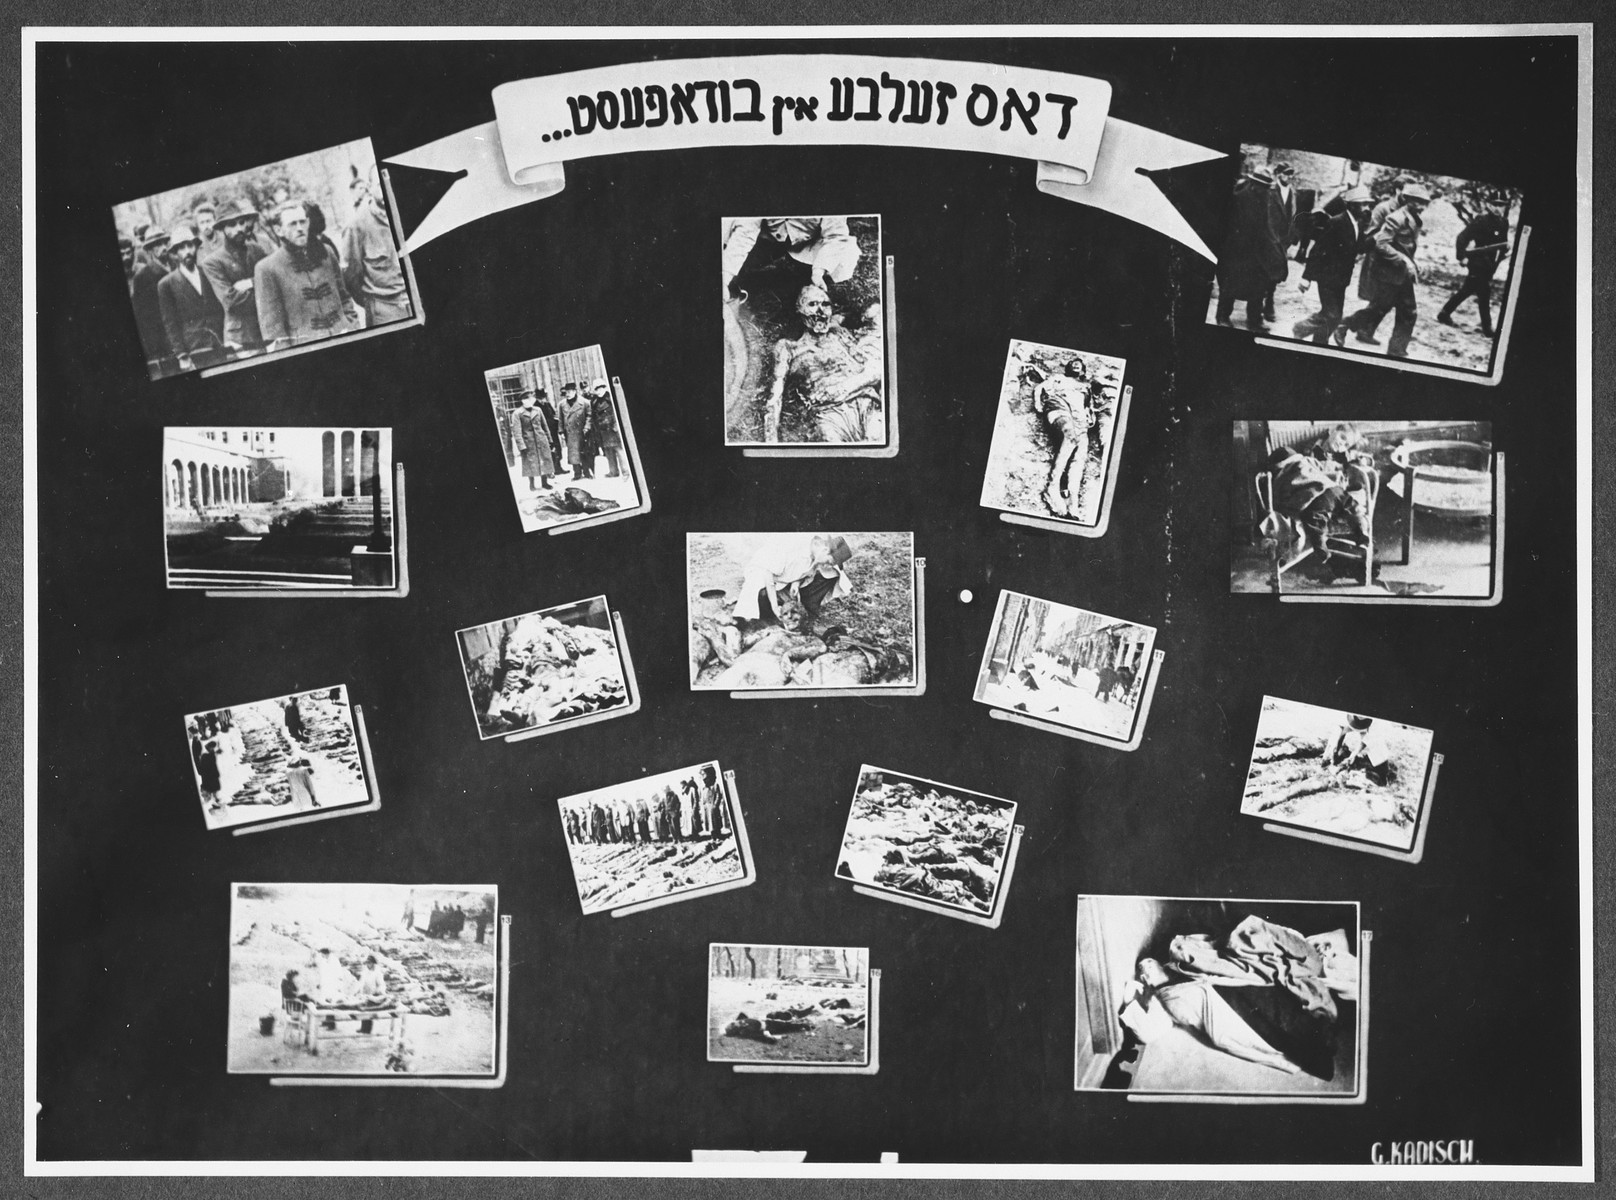 Display panel from a photo exhibition on the Holocaust "The Same in Budapest...." created by photographer George Kaddishin a displaced persons' camp.

The exhibition consisted both of photographs that he shot in the Kovno ghetto as well as other photographs he collected from other ghettos and camps.